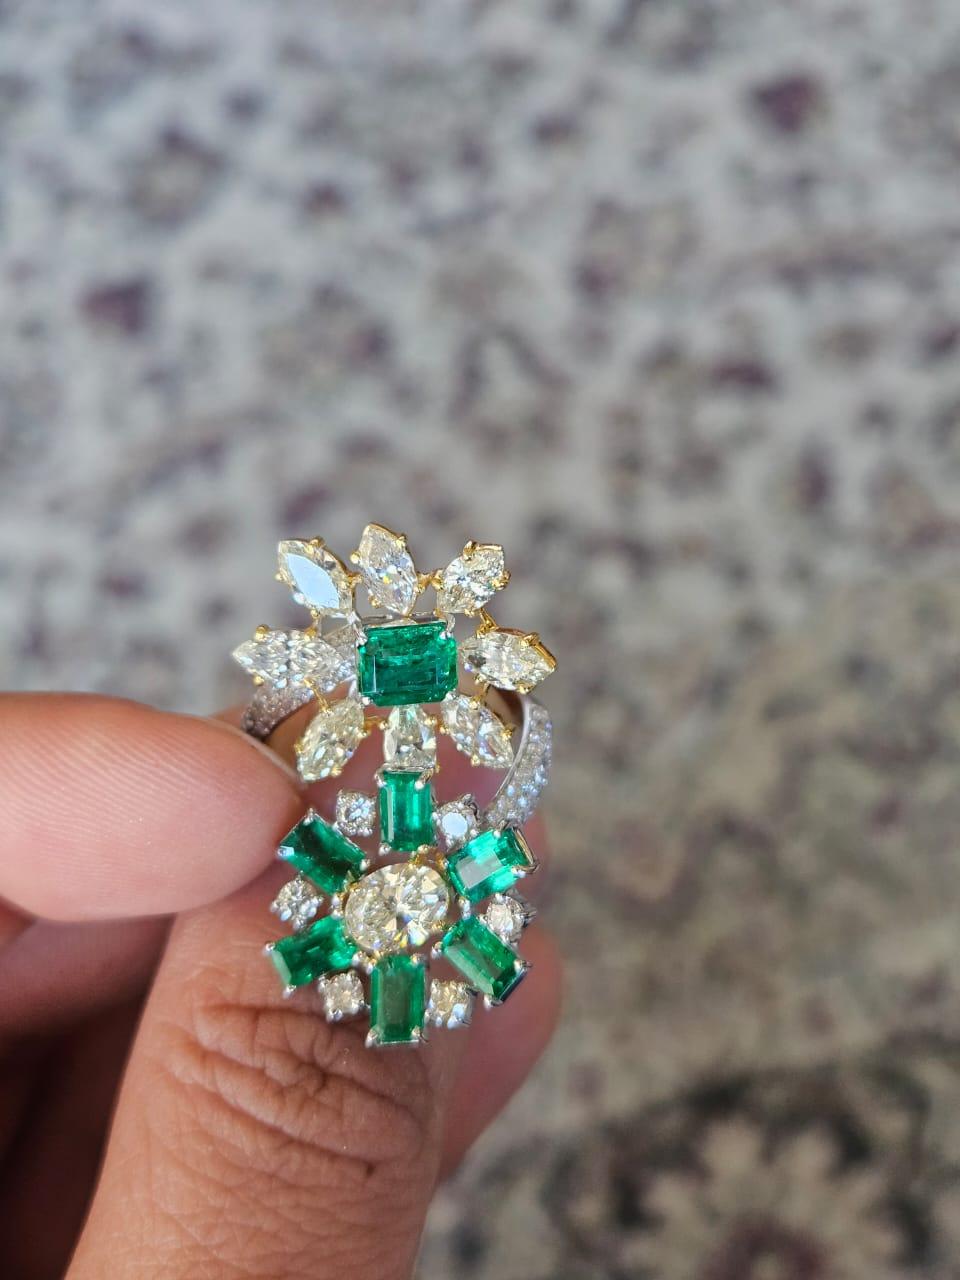 A very gorgeous and beautiful, modern style, Emerald Cocktail Ring set in 18K Gold & Yellow Diamonds. The weight of the Emeralds is 2.68 carats. The Emeralds are completely natural, without any treatment and is of Zambian origin. The combined